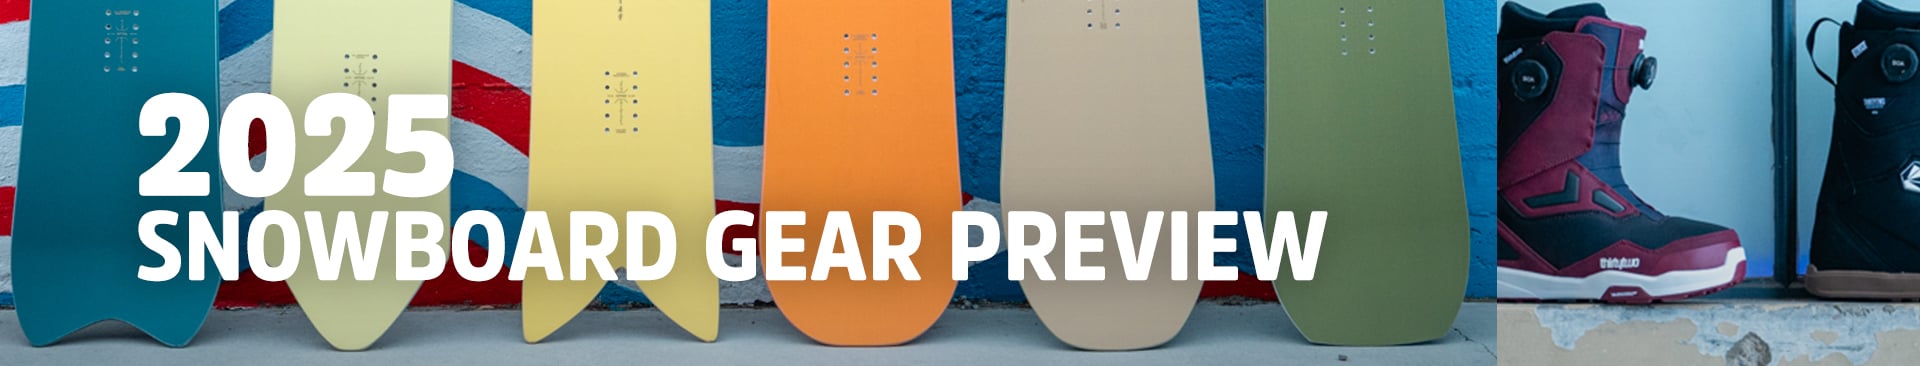 2025 Snowboard Gear Preview